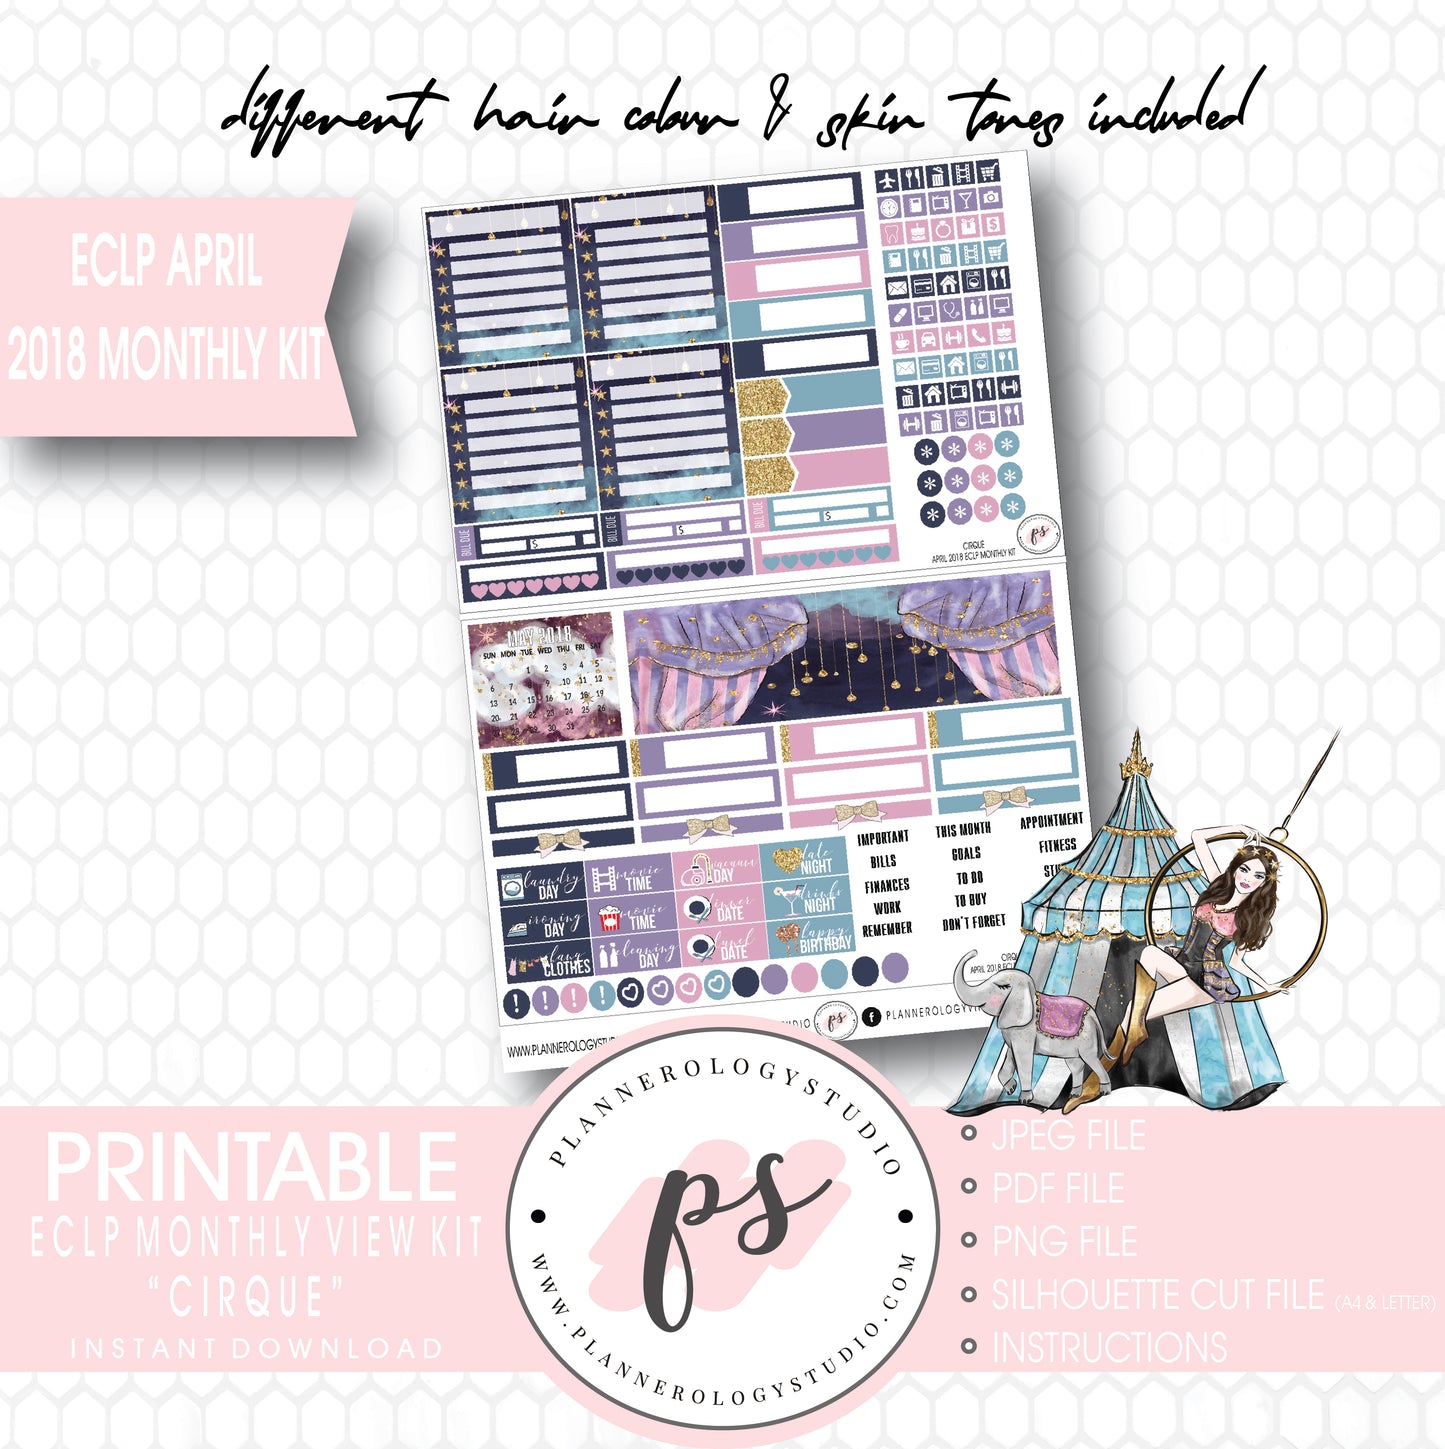 Cirque April 2018 Monthly View Kit Digital Printable Planner Stickers (for use with Erin Condren) - Plannerologystudio